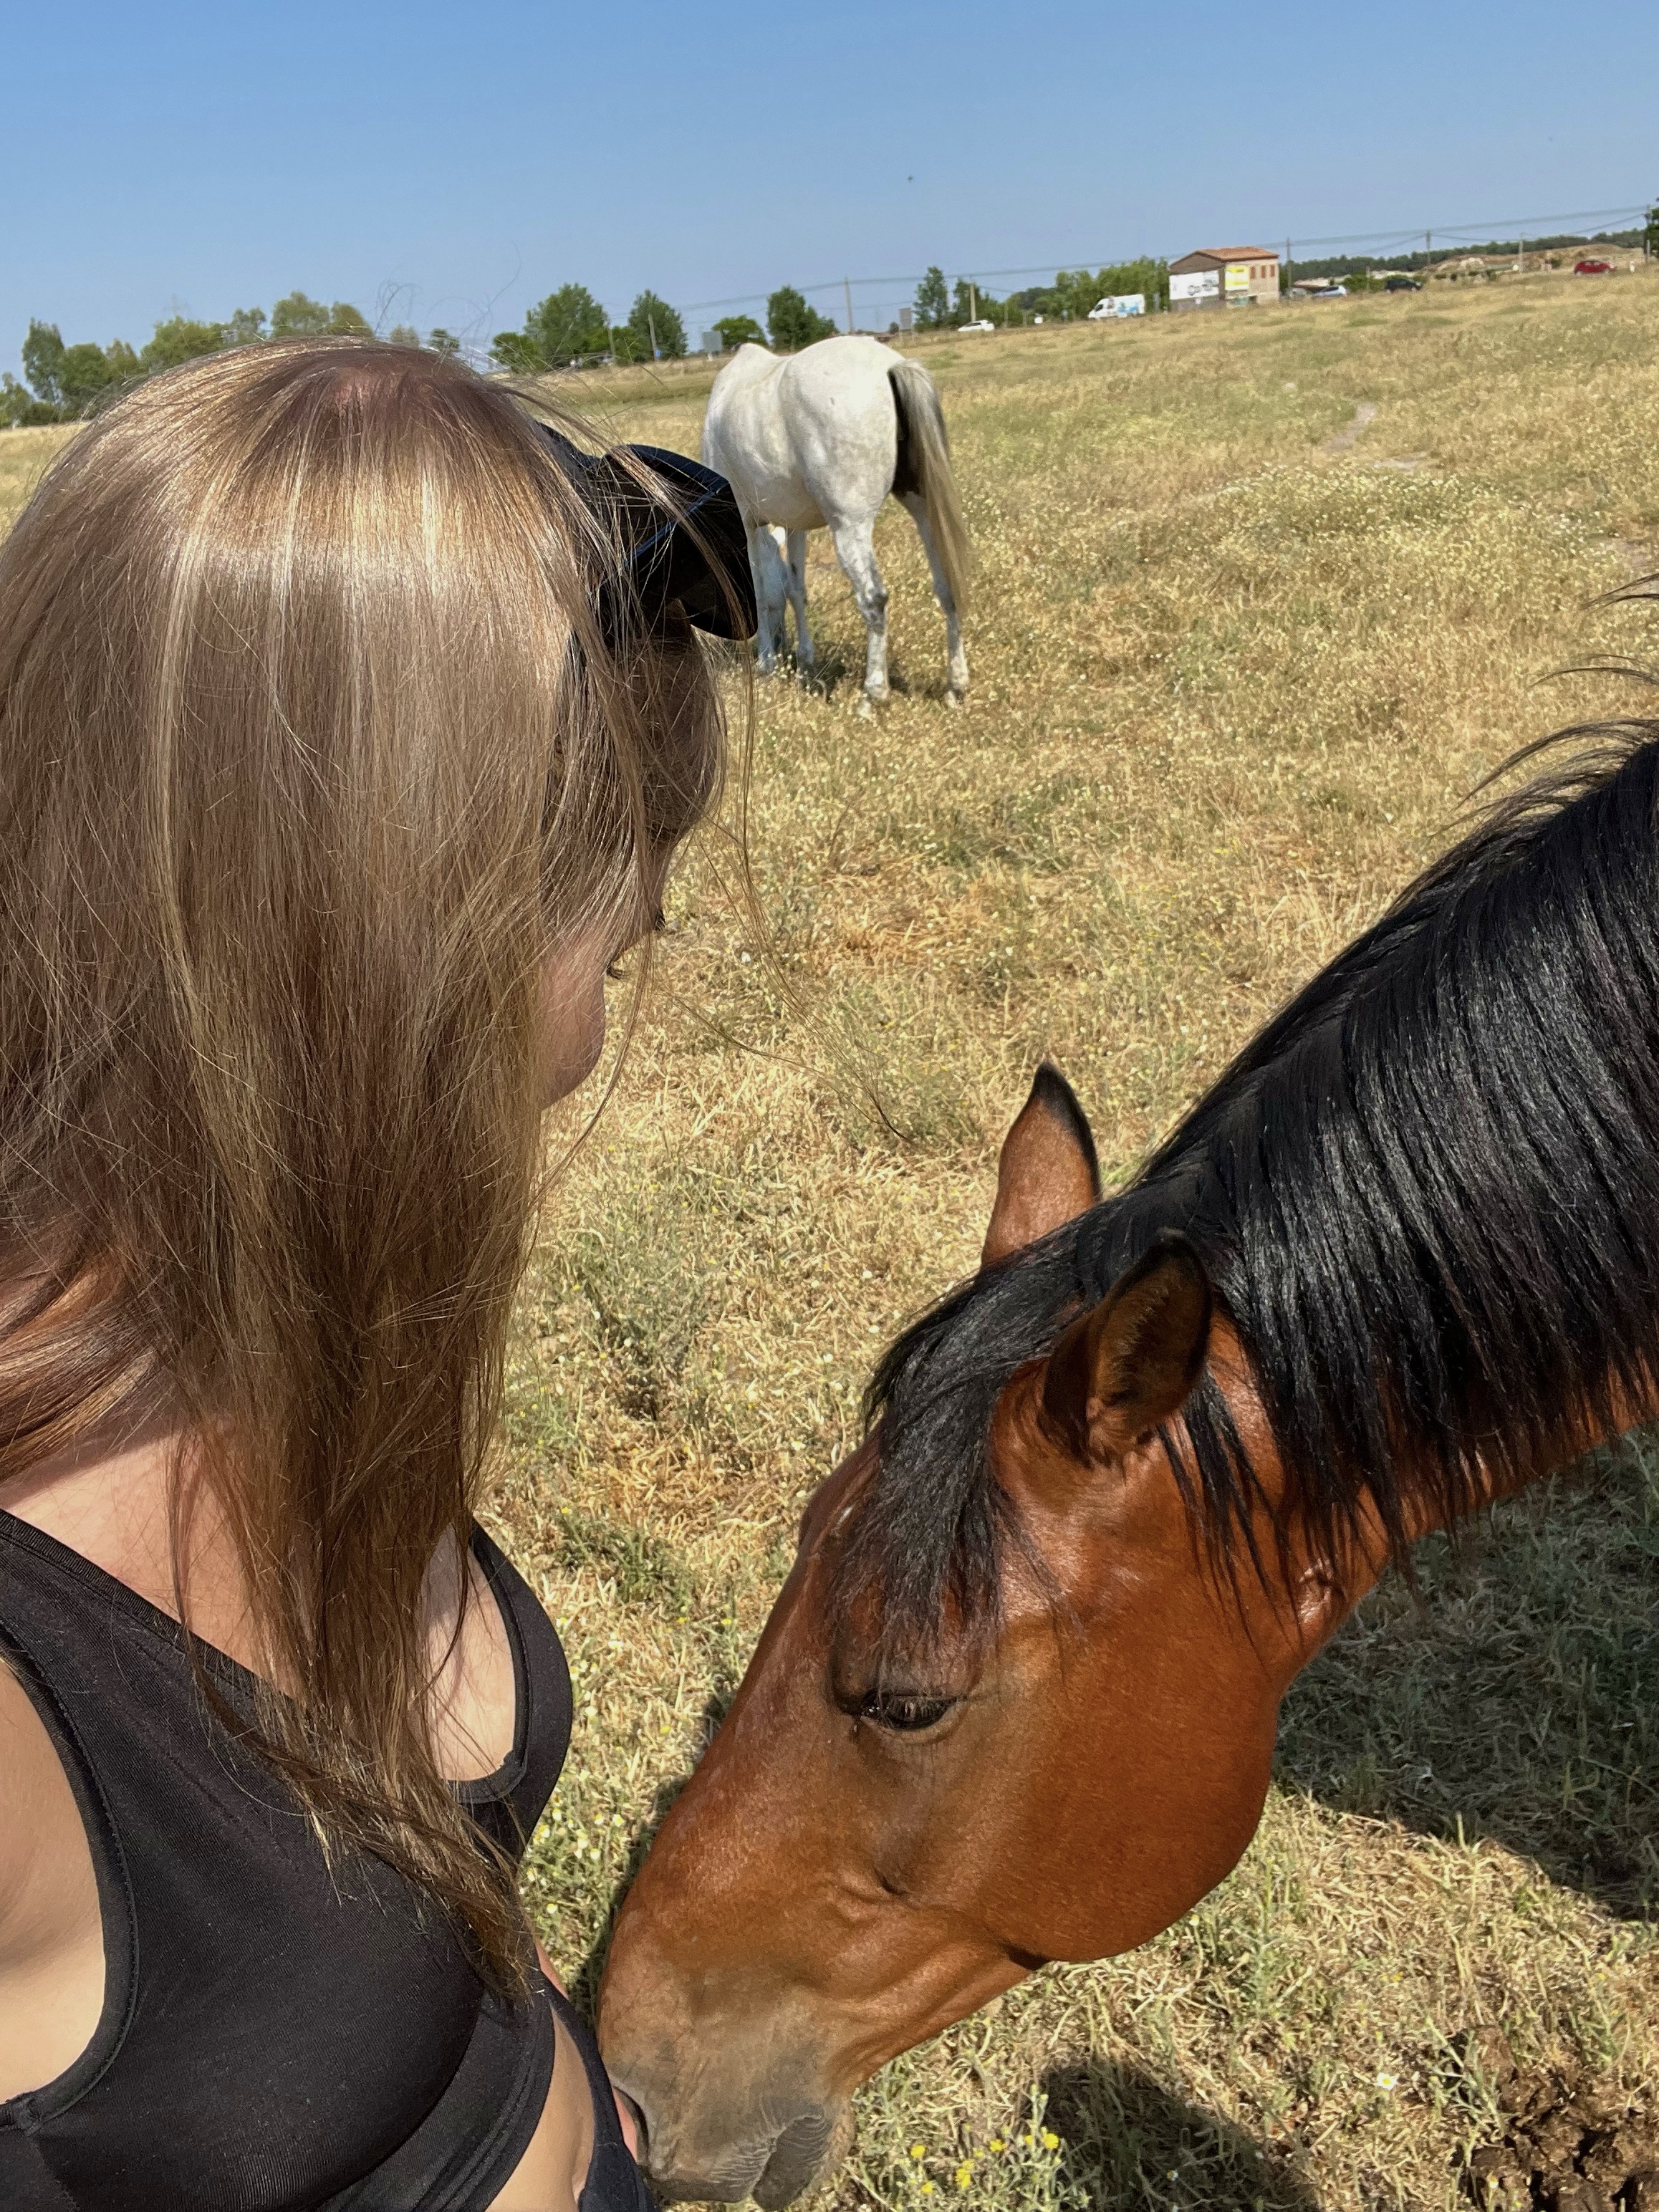 Youth Exchange Blog: Equestrian Tourism in Spain by Mette pilt